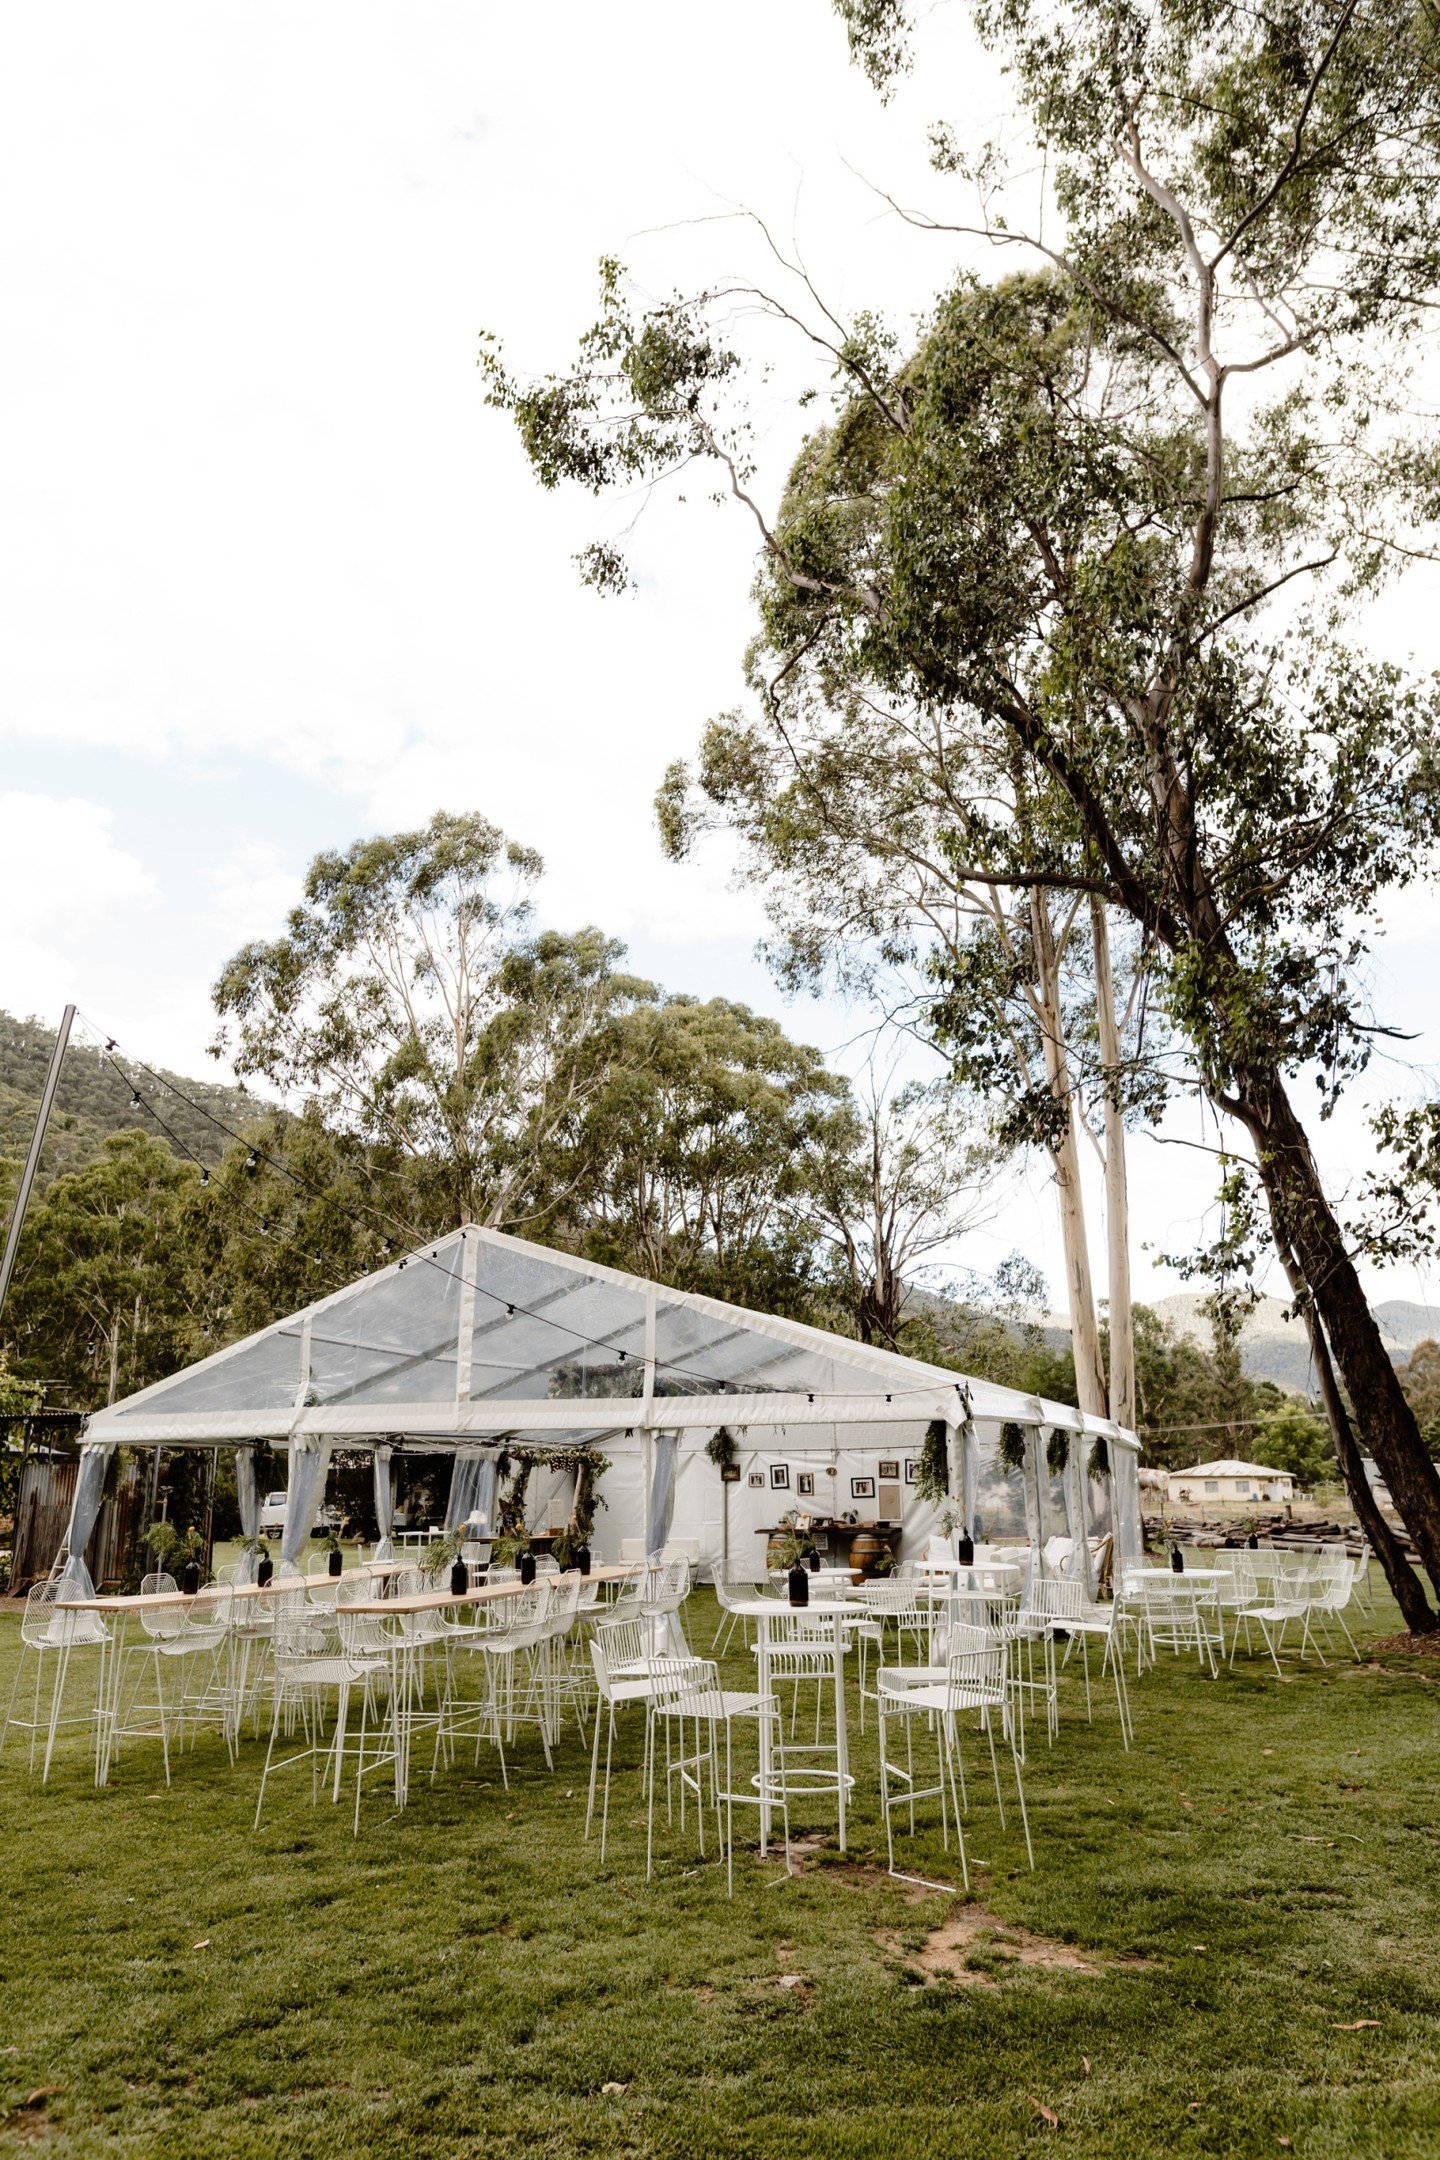 Our clear span marquee structure in the beautiful Buckland Valley.

Photographer @fieldofcanningsphotography
Marquee &amp; furniture @bangeventco
Venue Private Property